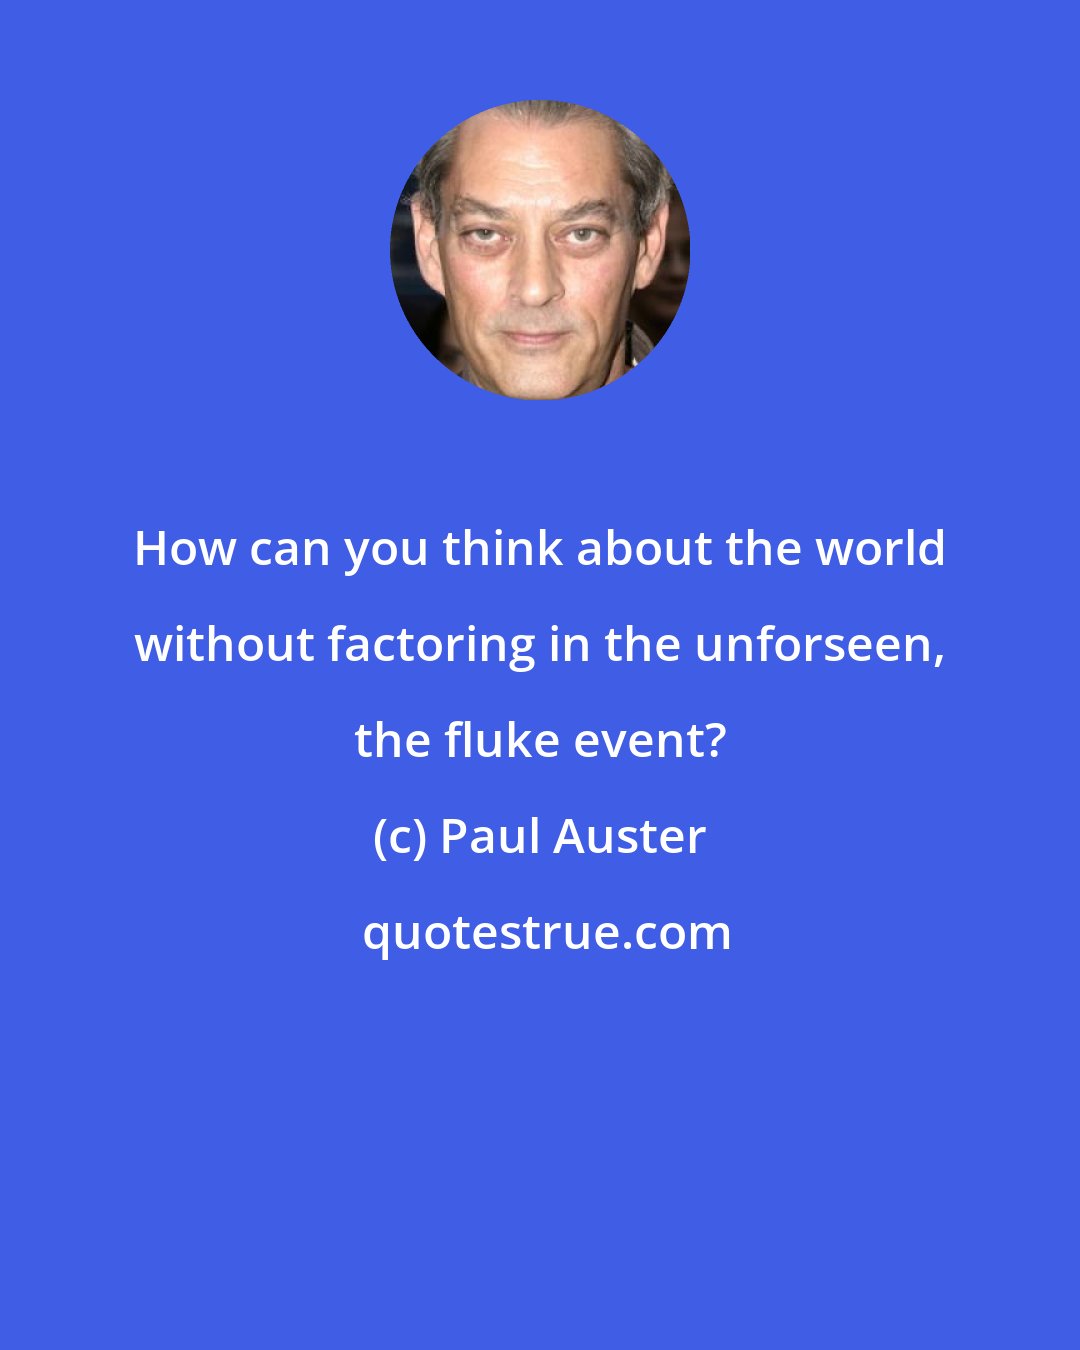 Paul Auster: How can you think about the world without factoring in the unforseen, the fluke event?